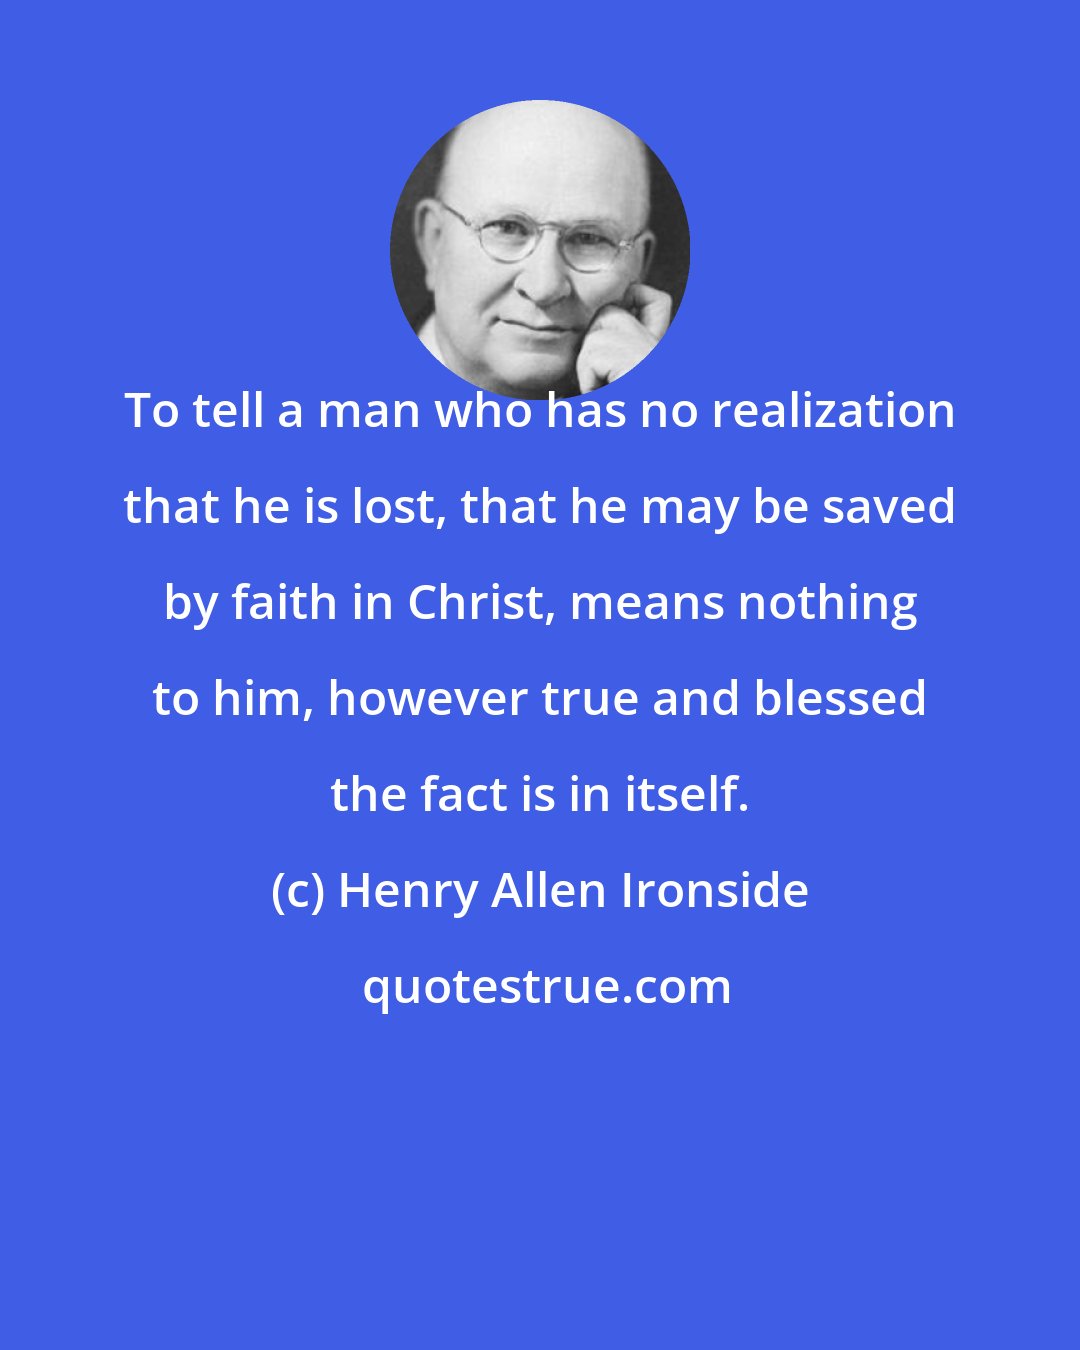 Henry Allen Ironside: To tell a man who has no realization that he is lost, that he may be saved by faith in Christ, means nothing to him, however true and blessed the fact is in itself.